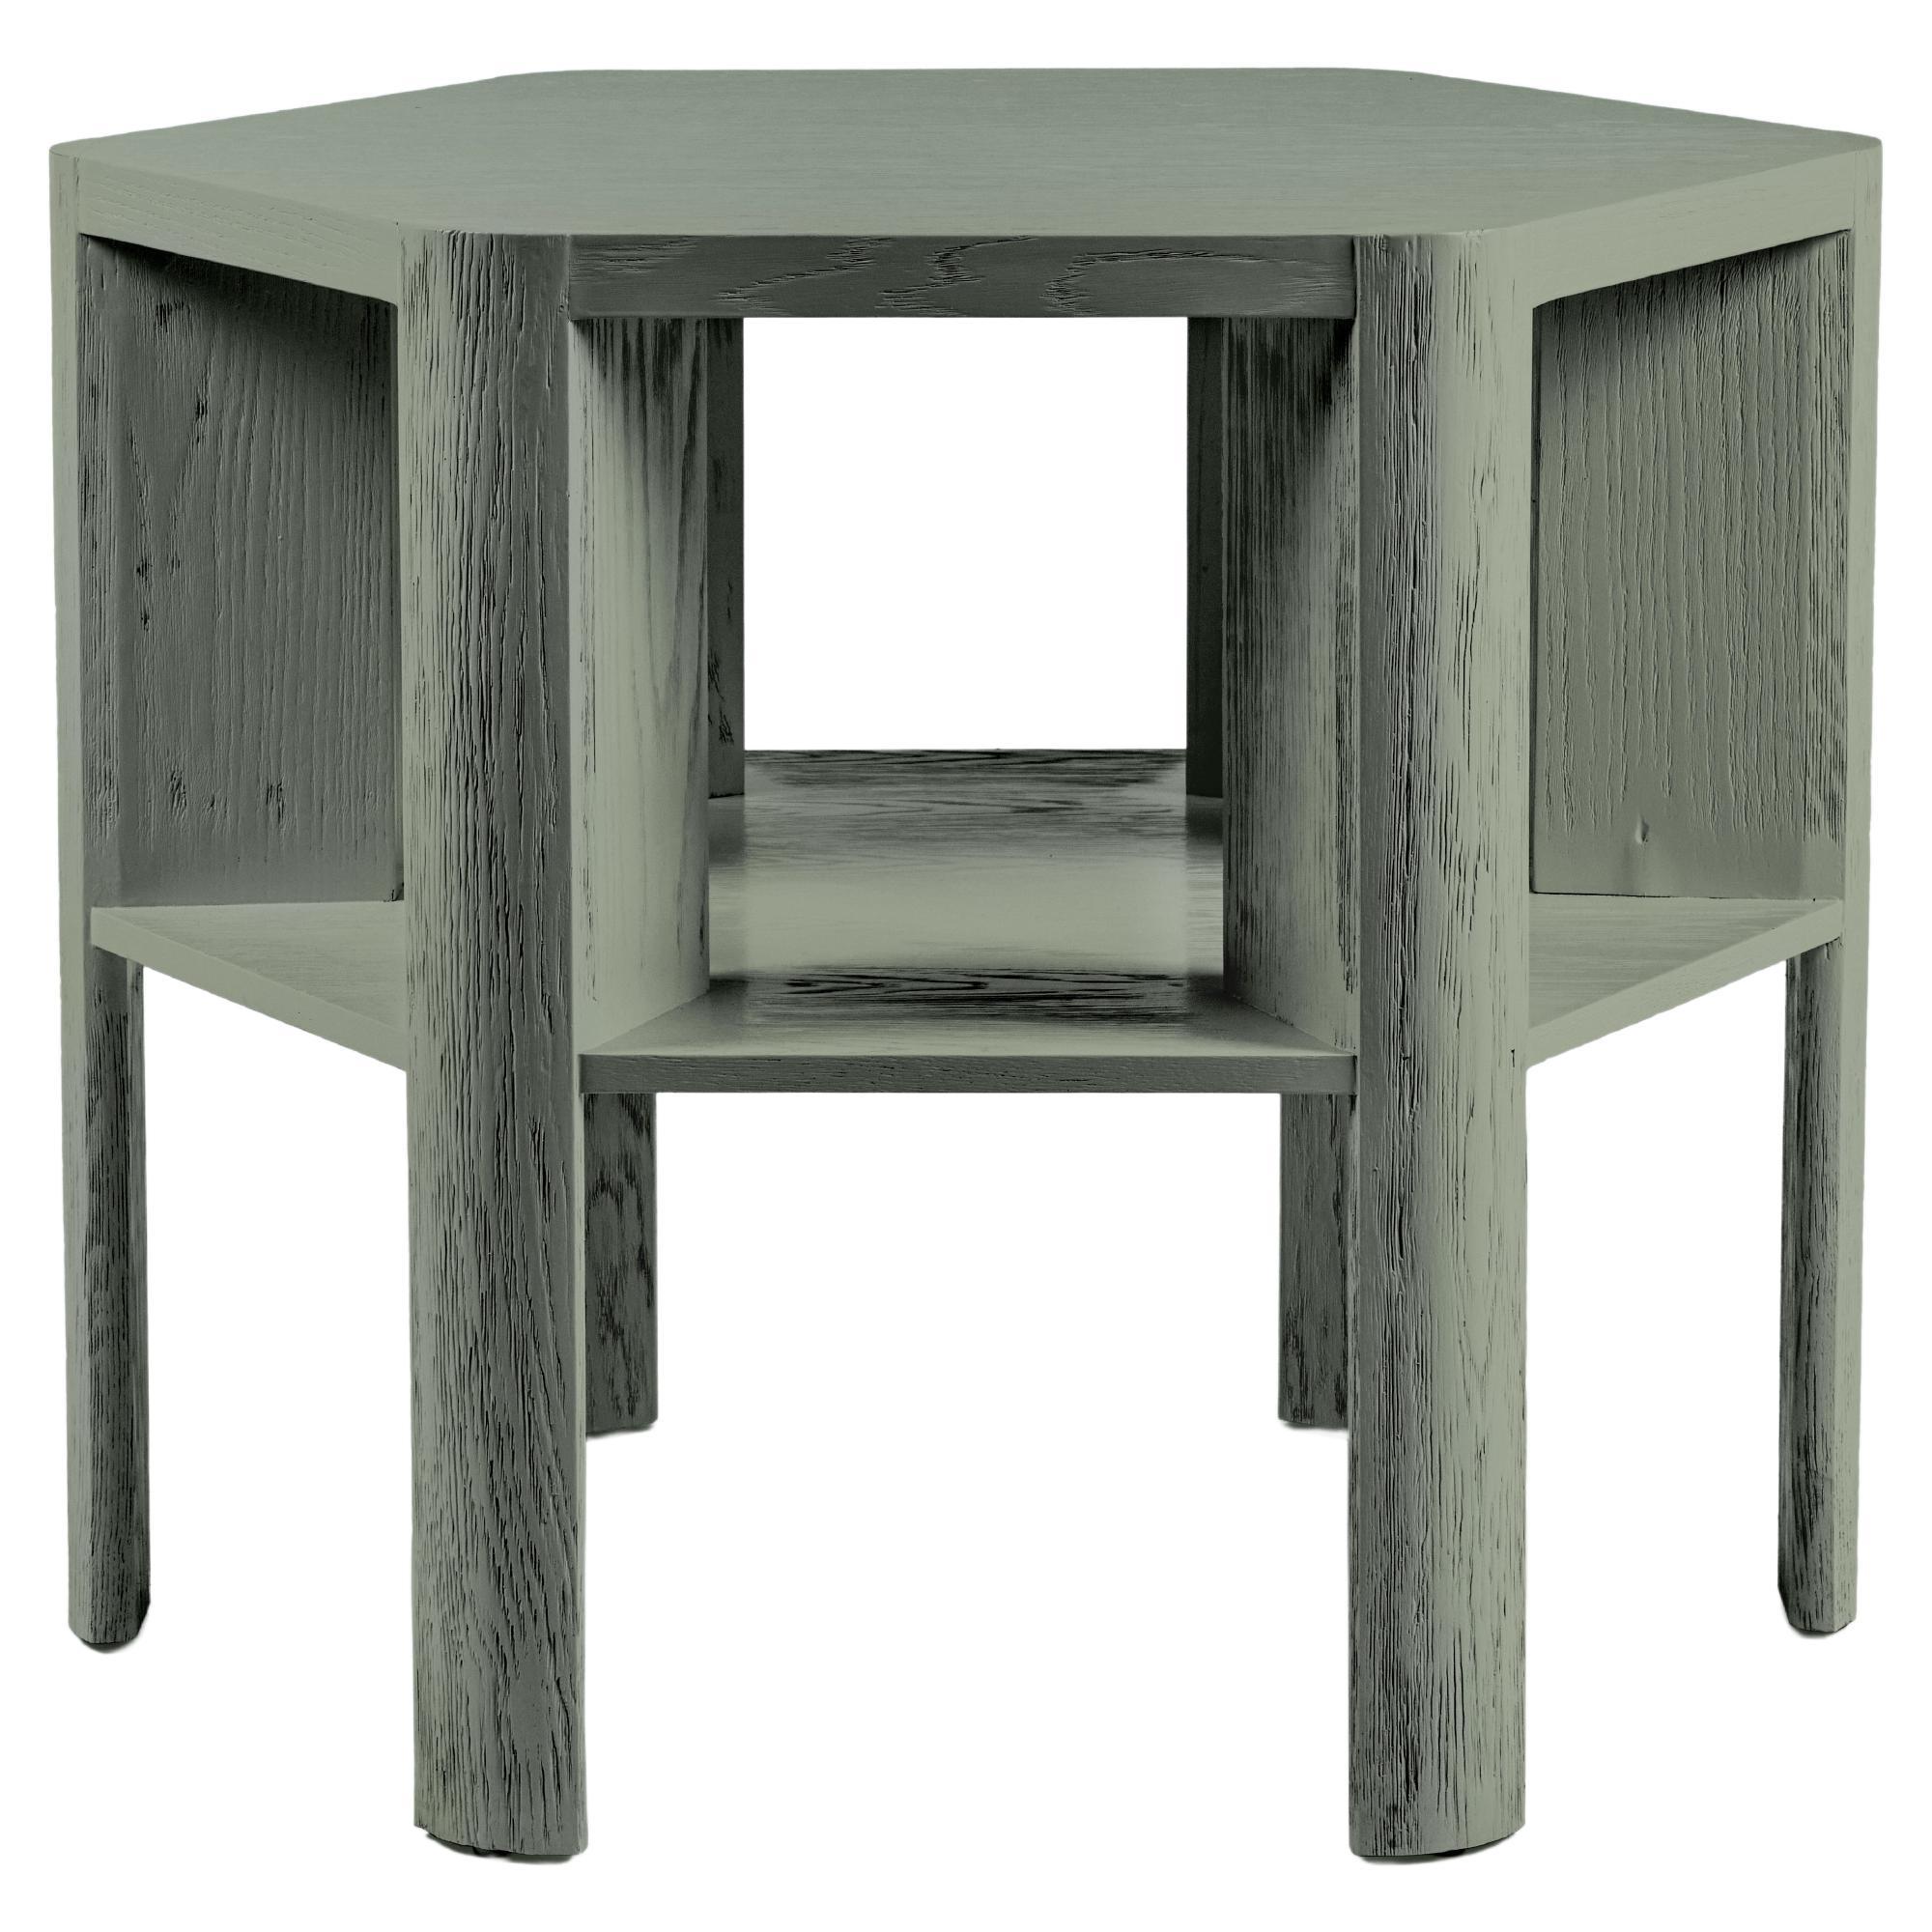 Minimalist Modern Lacquered Library Table Shown in Scrubbed Lichen For Sale